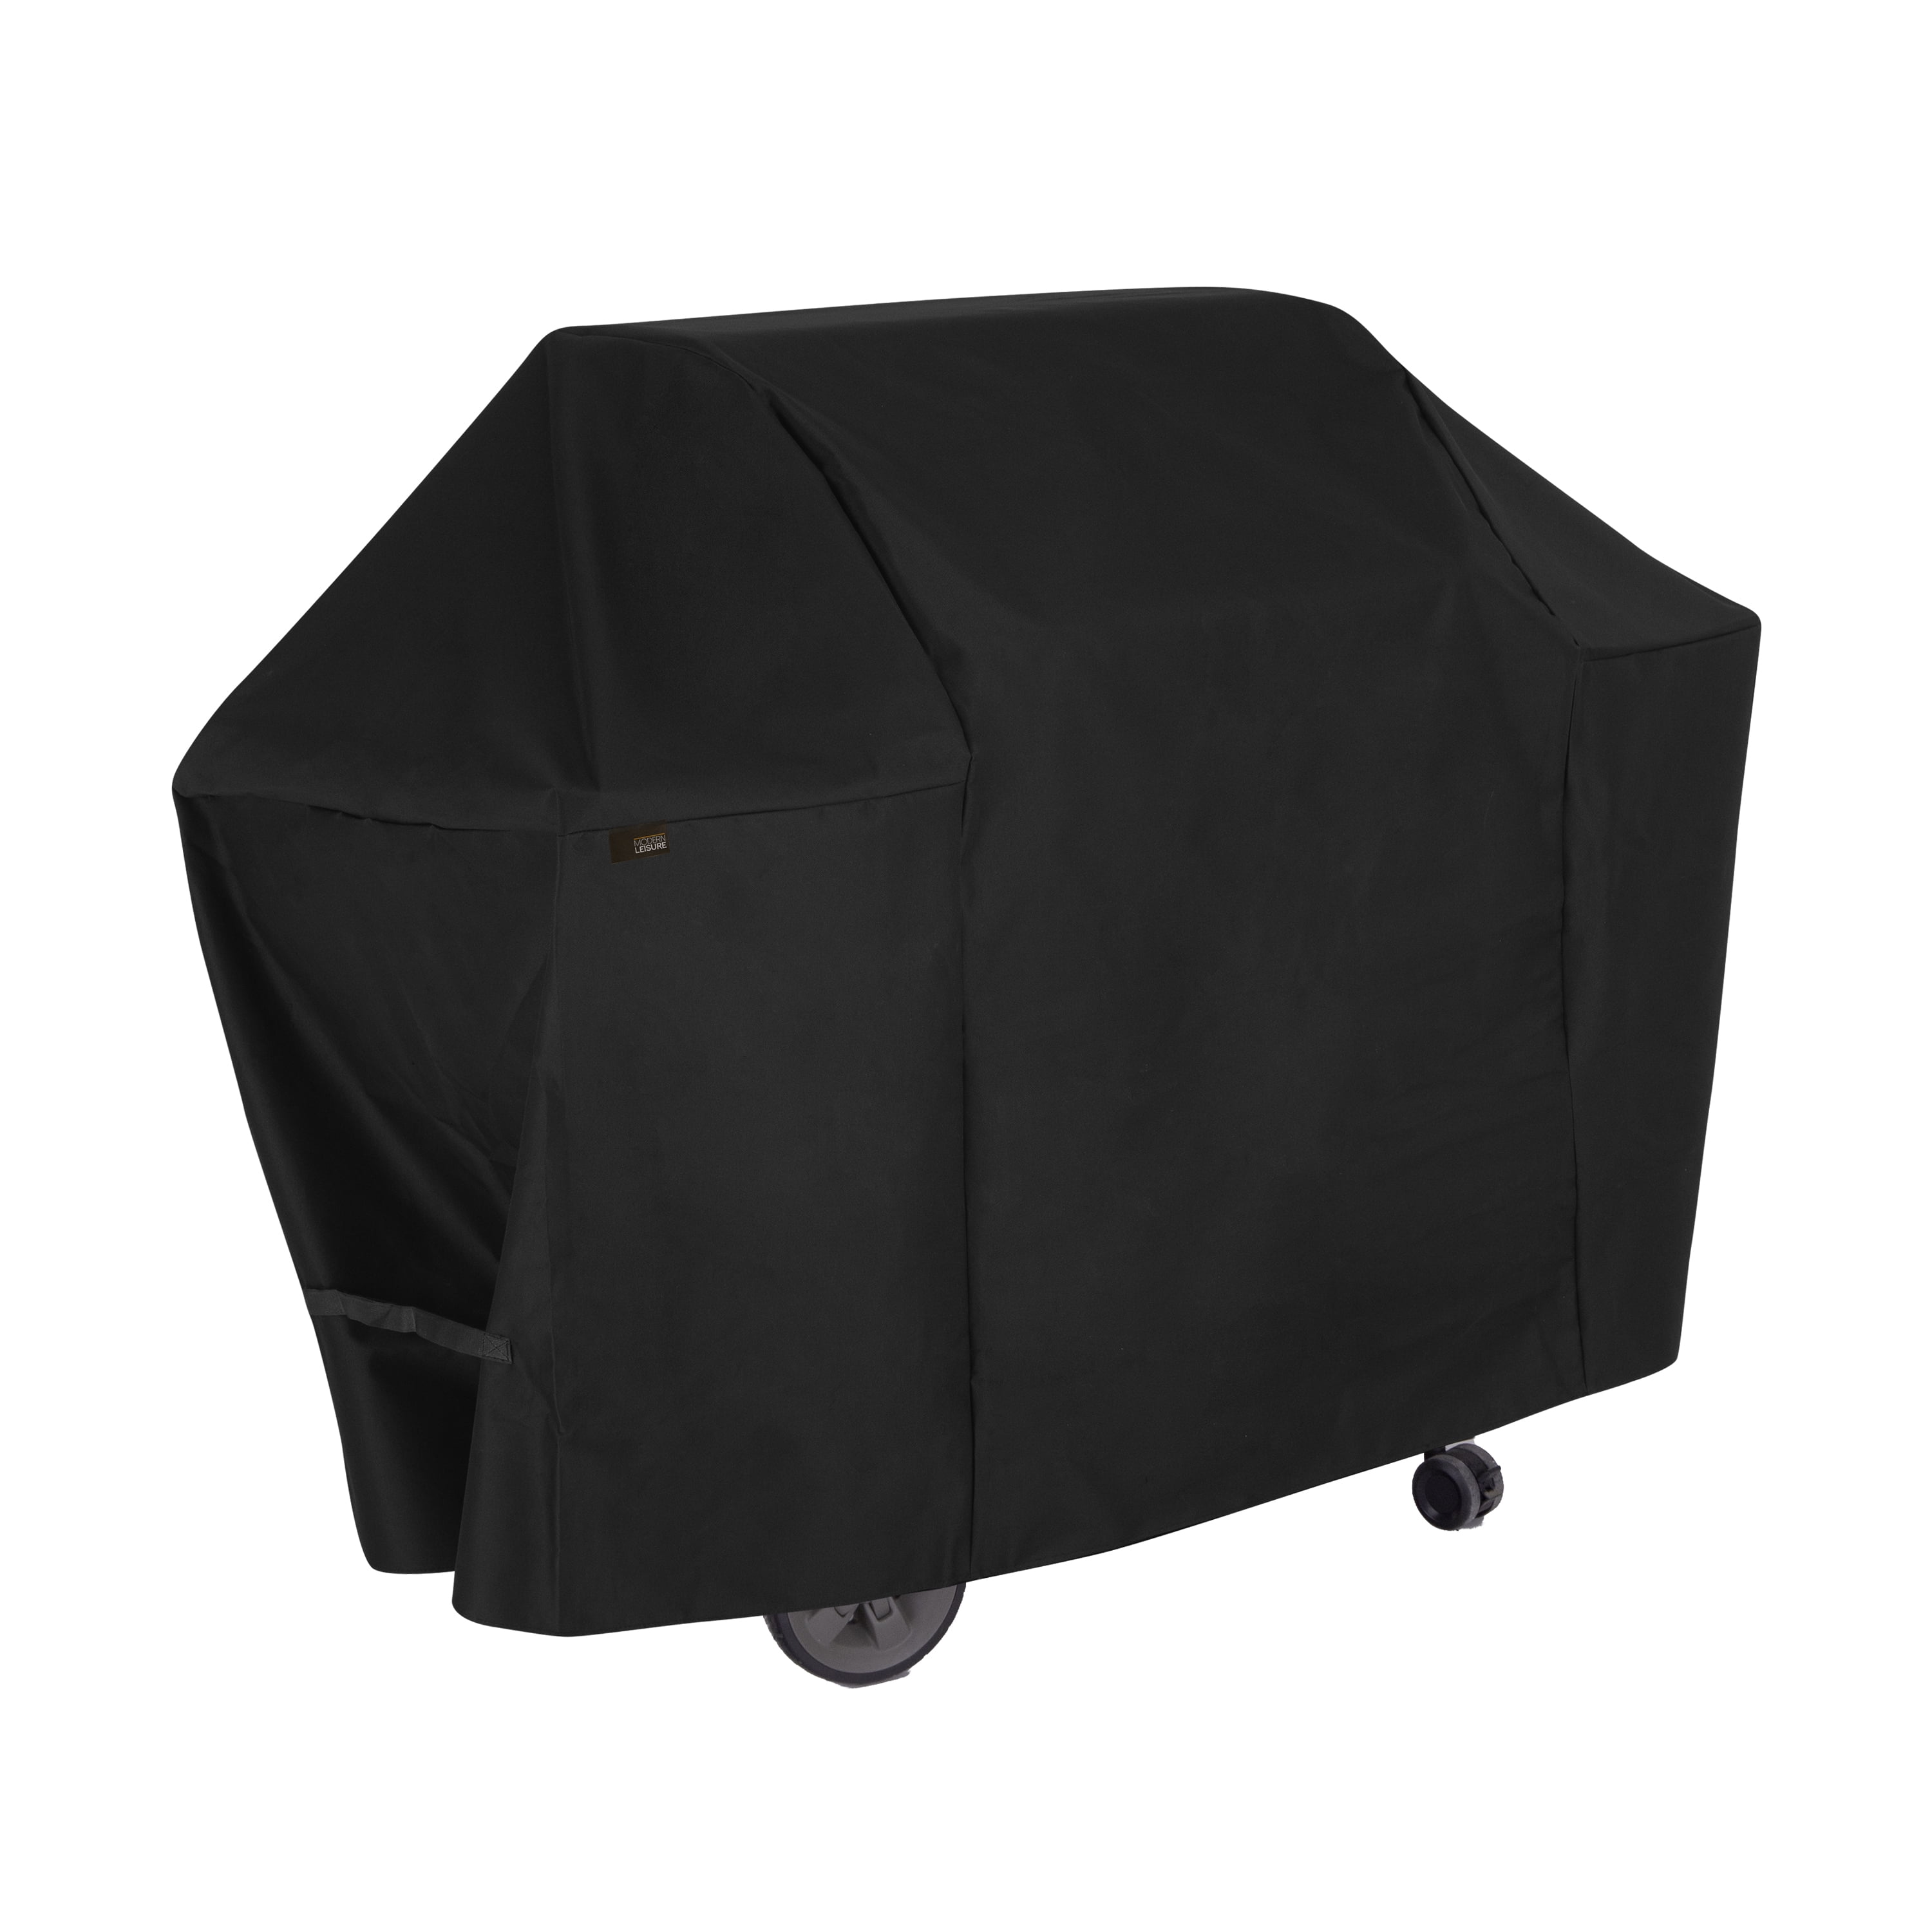 Grill Cover Fits Most 3 Burner Grills Y7 for sale online Universal 55 In 